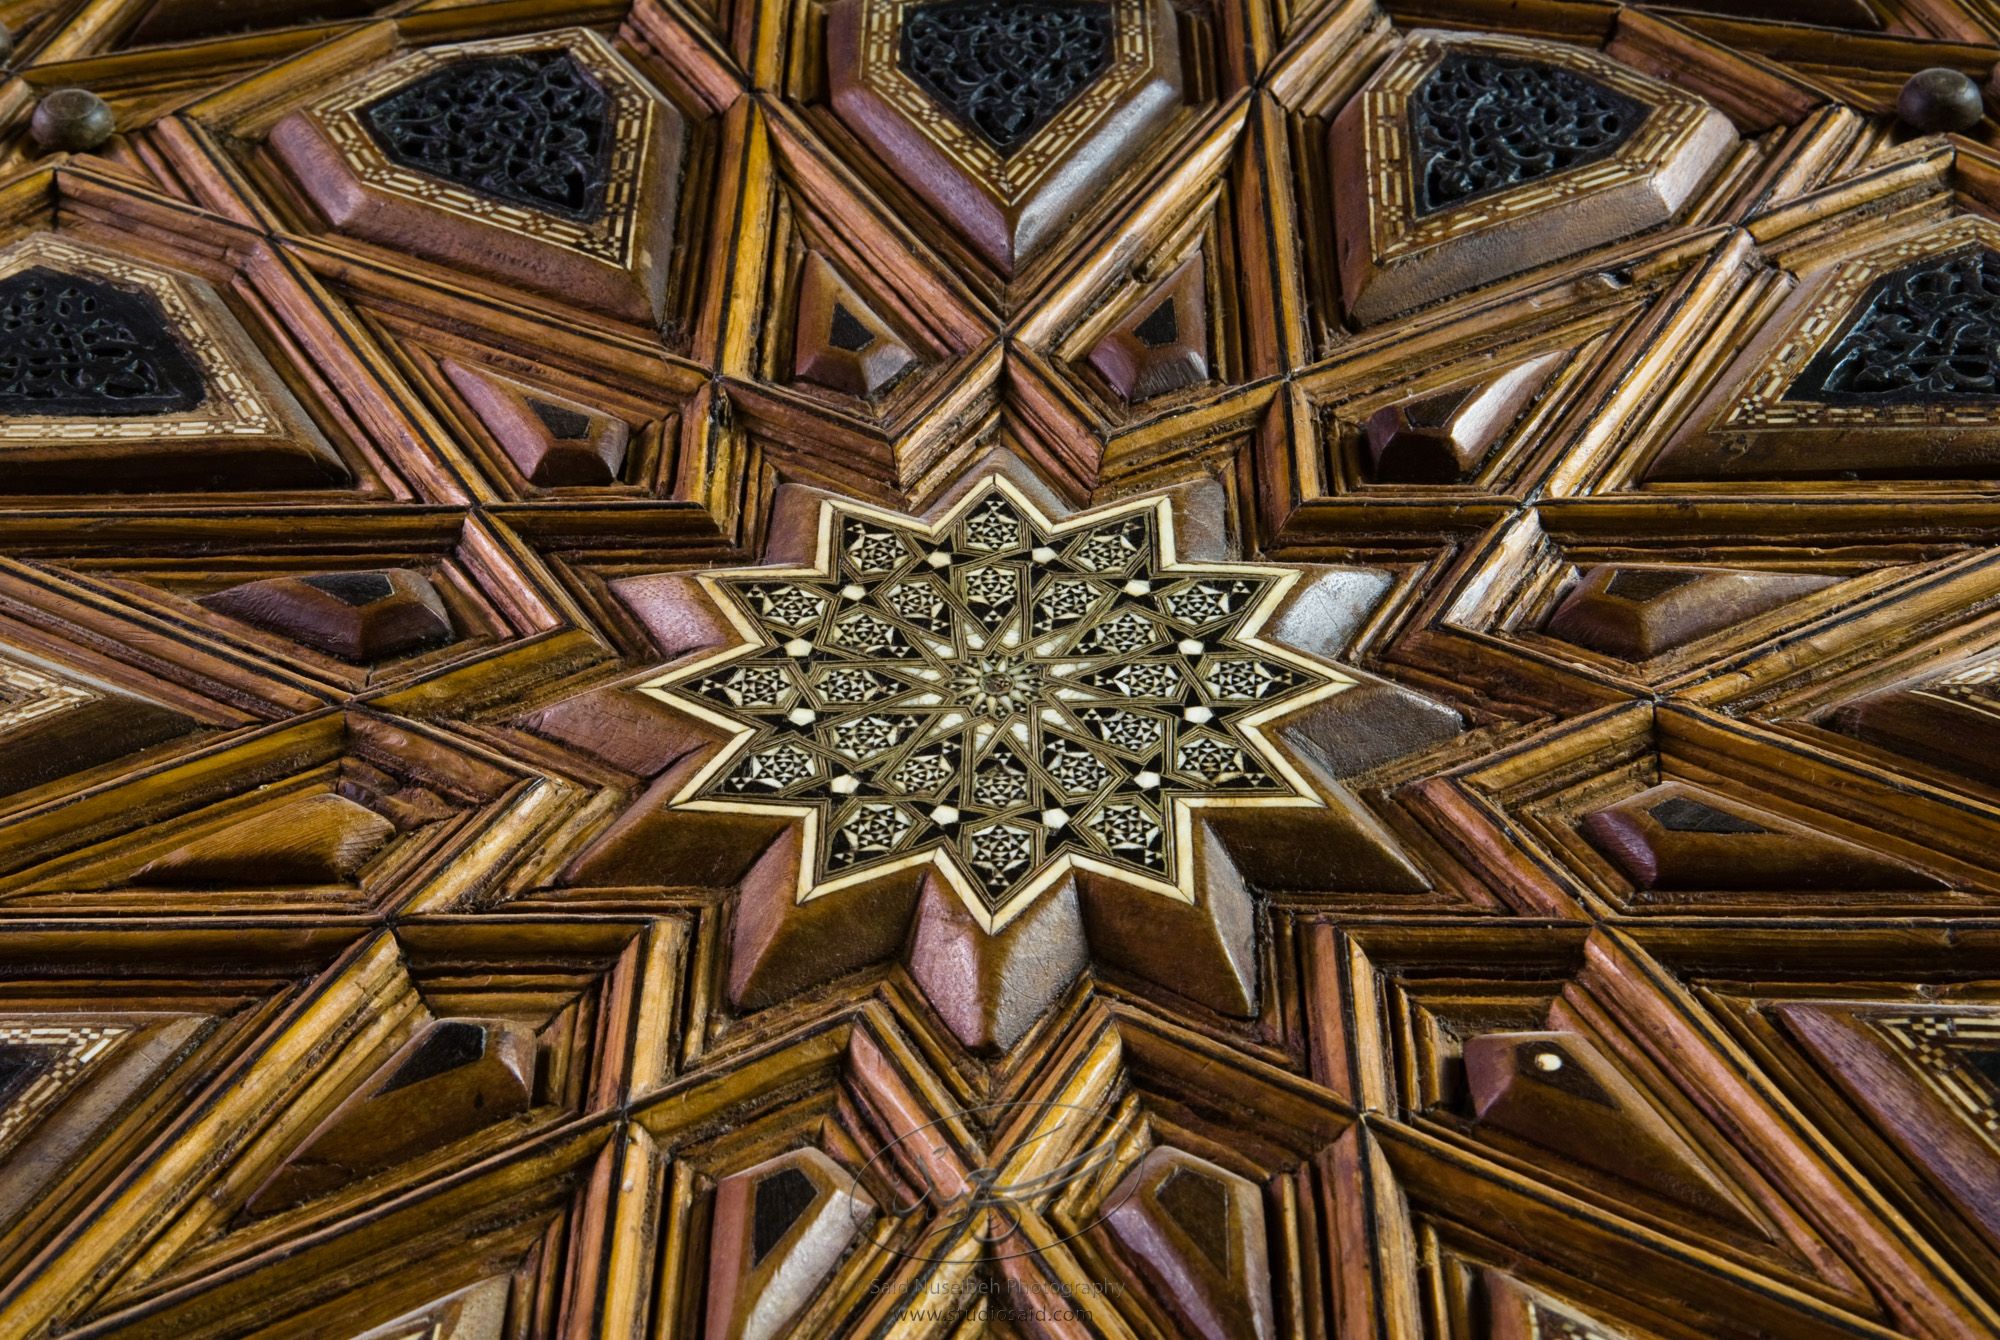 "Radiating Dodecagon. Minbar, Carved Woodwork and Inlay Detail"The late-13th / early-14th c. Mamluk minbar, or pulpit, of Sultan al-Nasir Muhammad, the ninth Mamluk Sultan from Cairo and son of Qalawun. The minbar was located in the Umayyad Mosque in Aleppo, Haleb, prior to its damage and disappearance in May 2013.